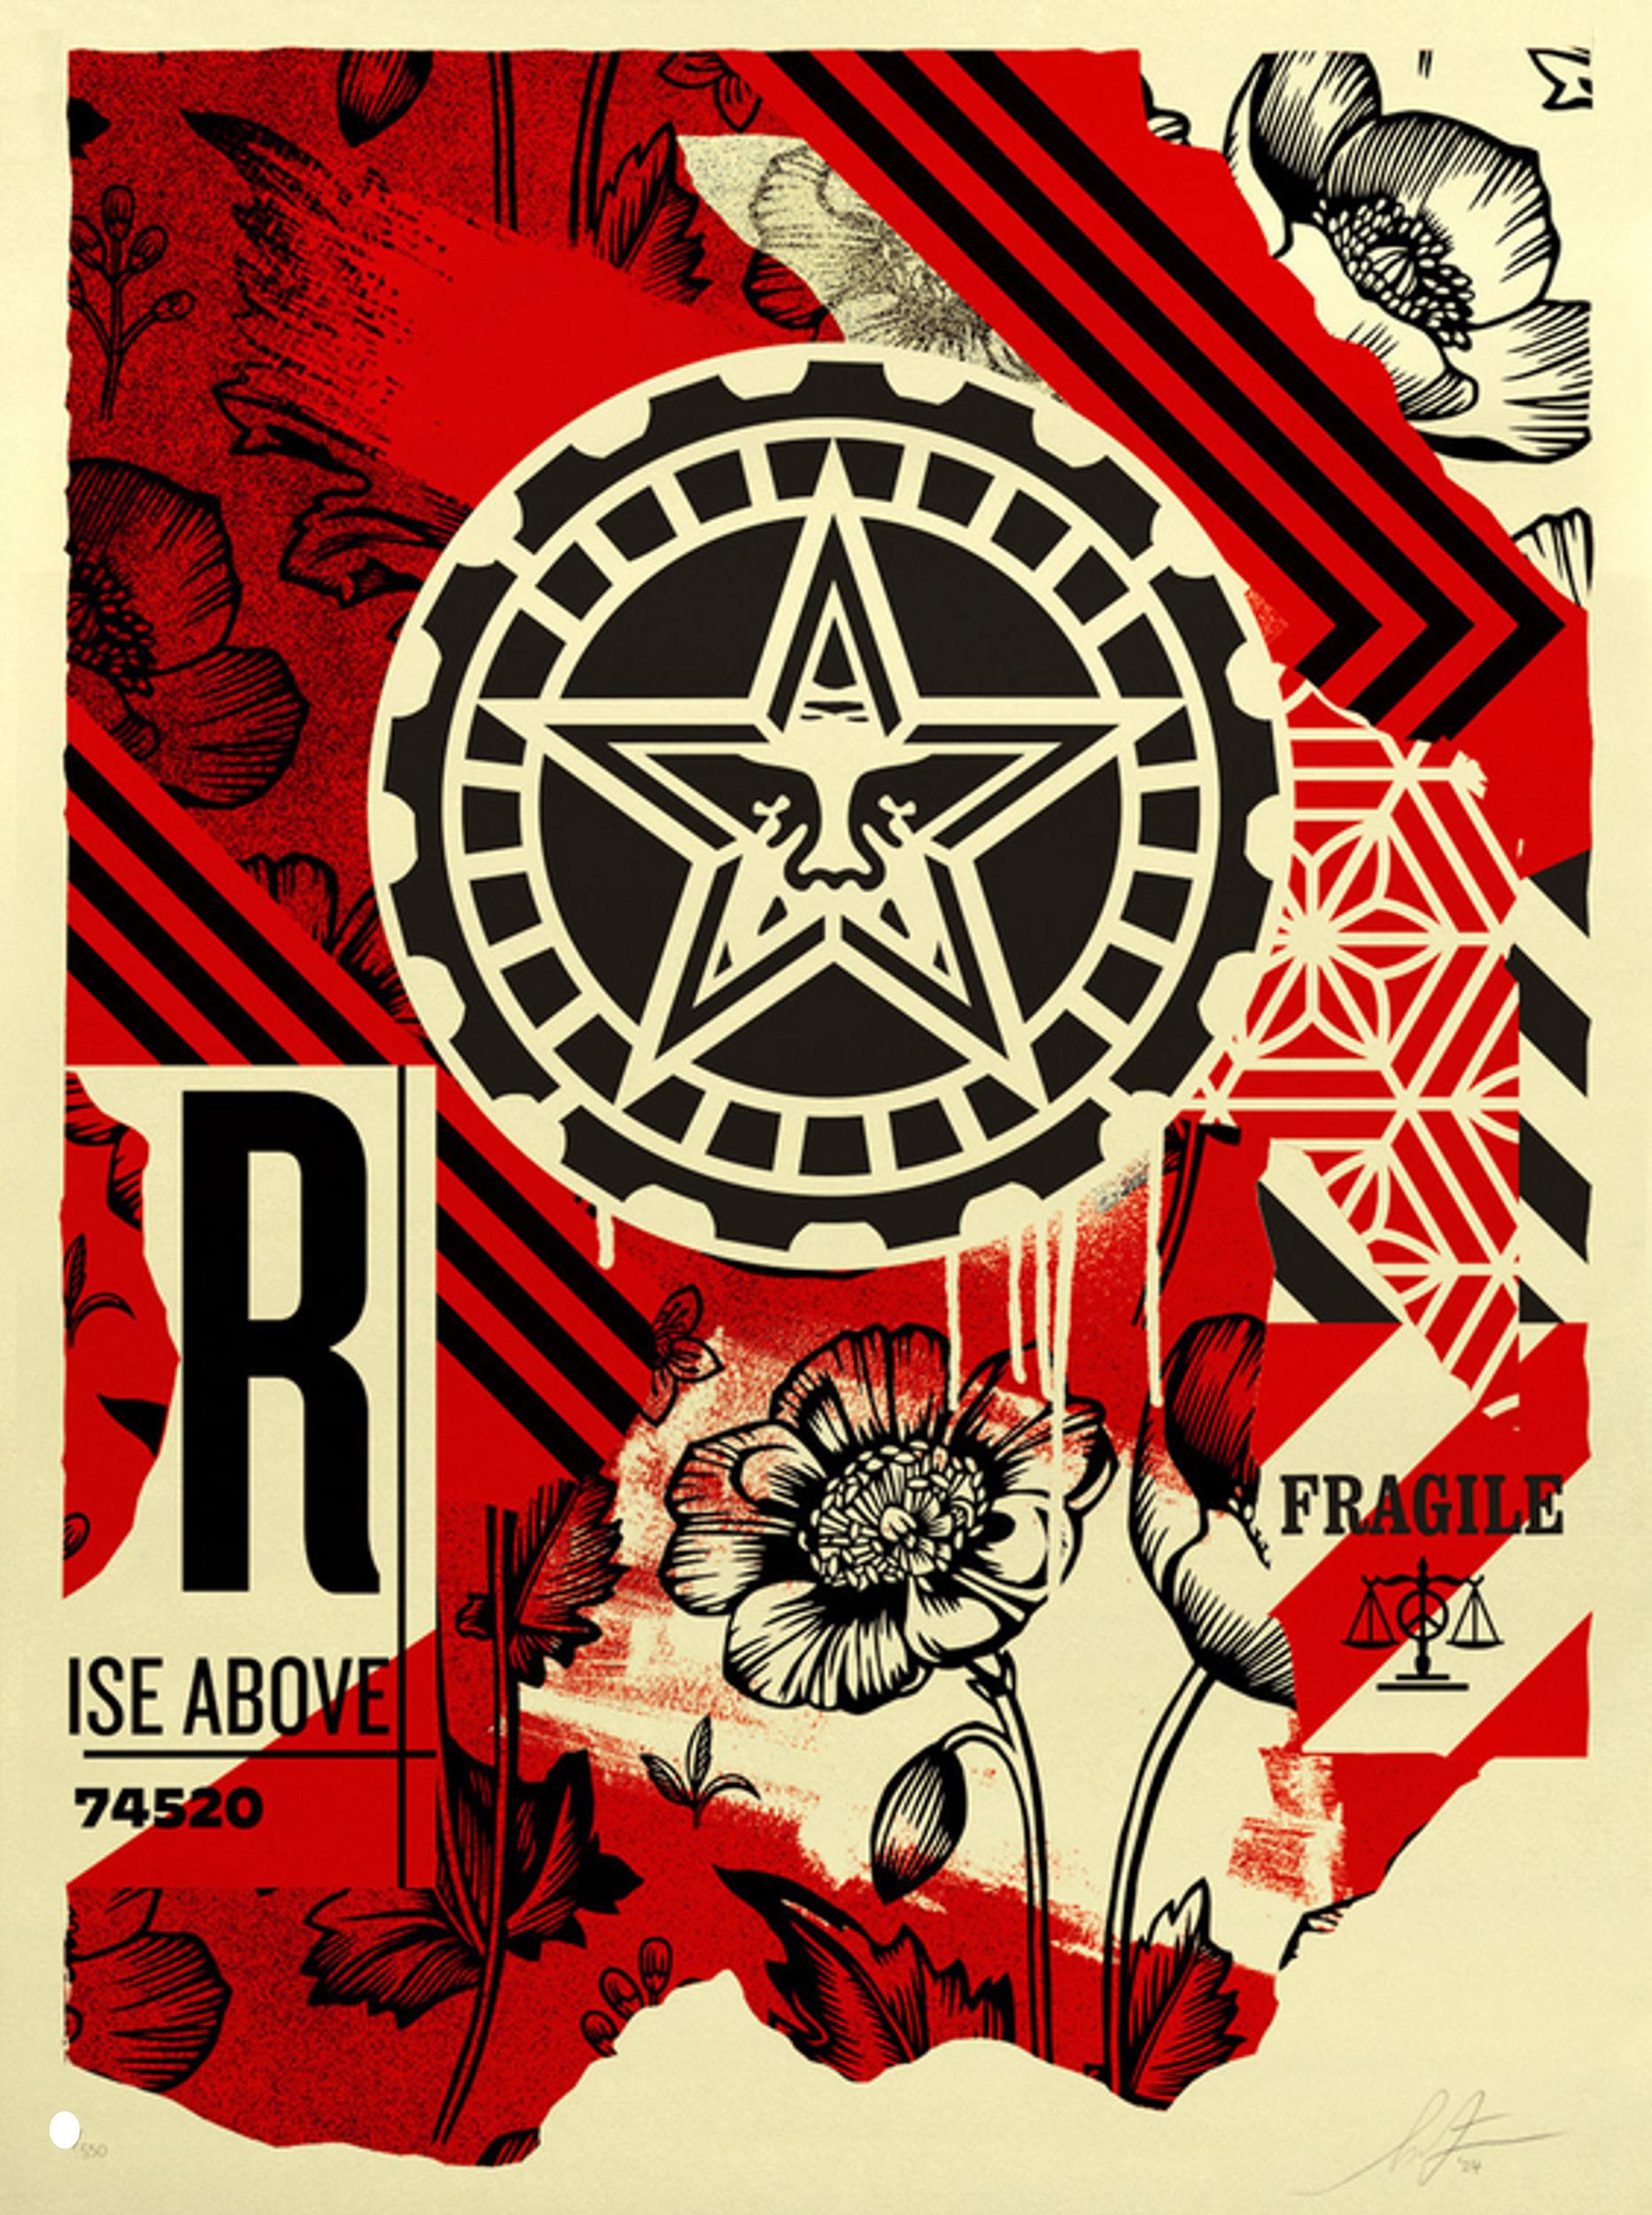 Gears of Justice (Empowerment, Industrious, leveling playing field, ~35% OFF) – Print von Shepard Fairey